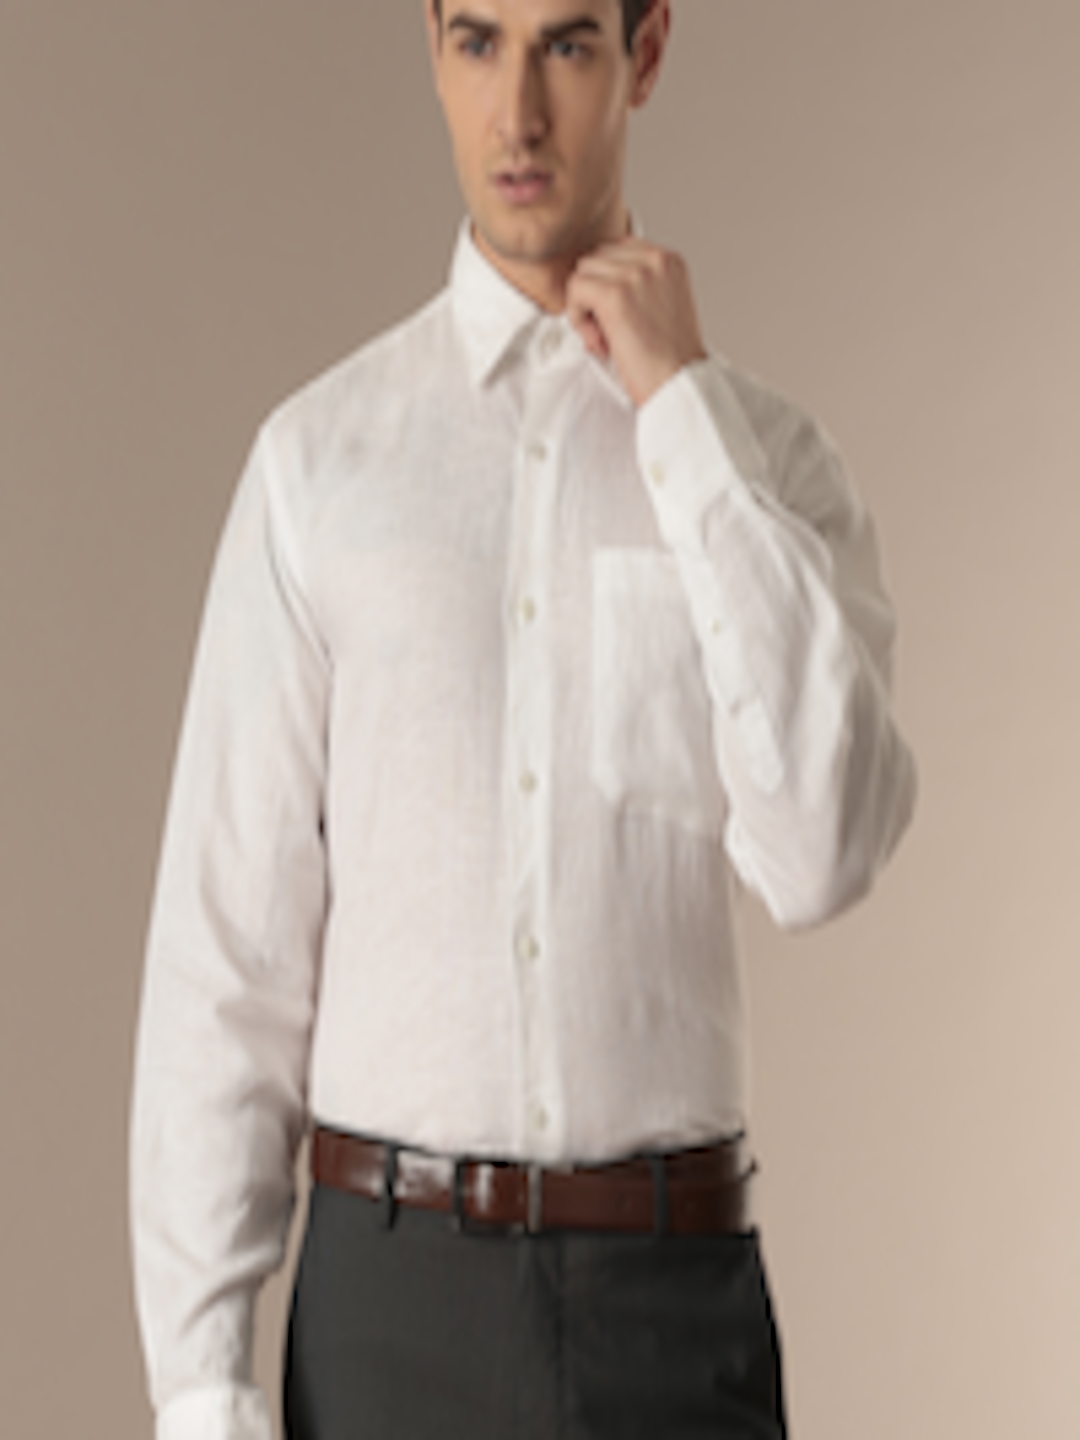 Buy Louis Philippe White Linen Tailored Fit Formal Shirt - Shirts for Men 2018100 | Myntra